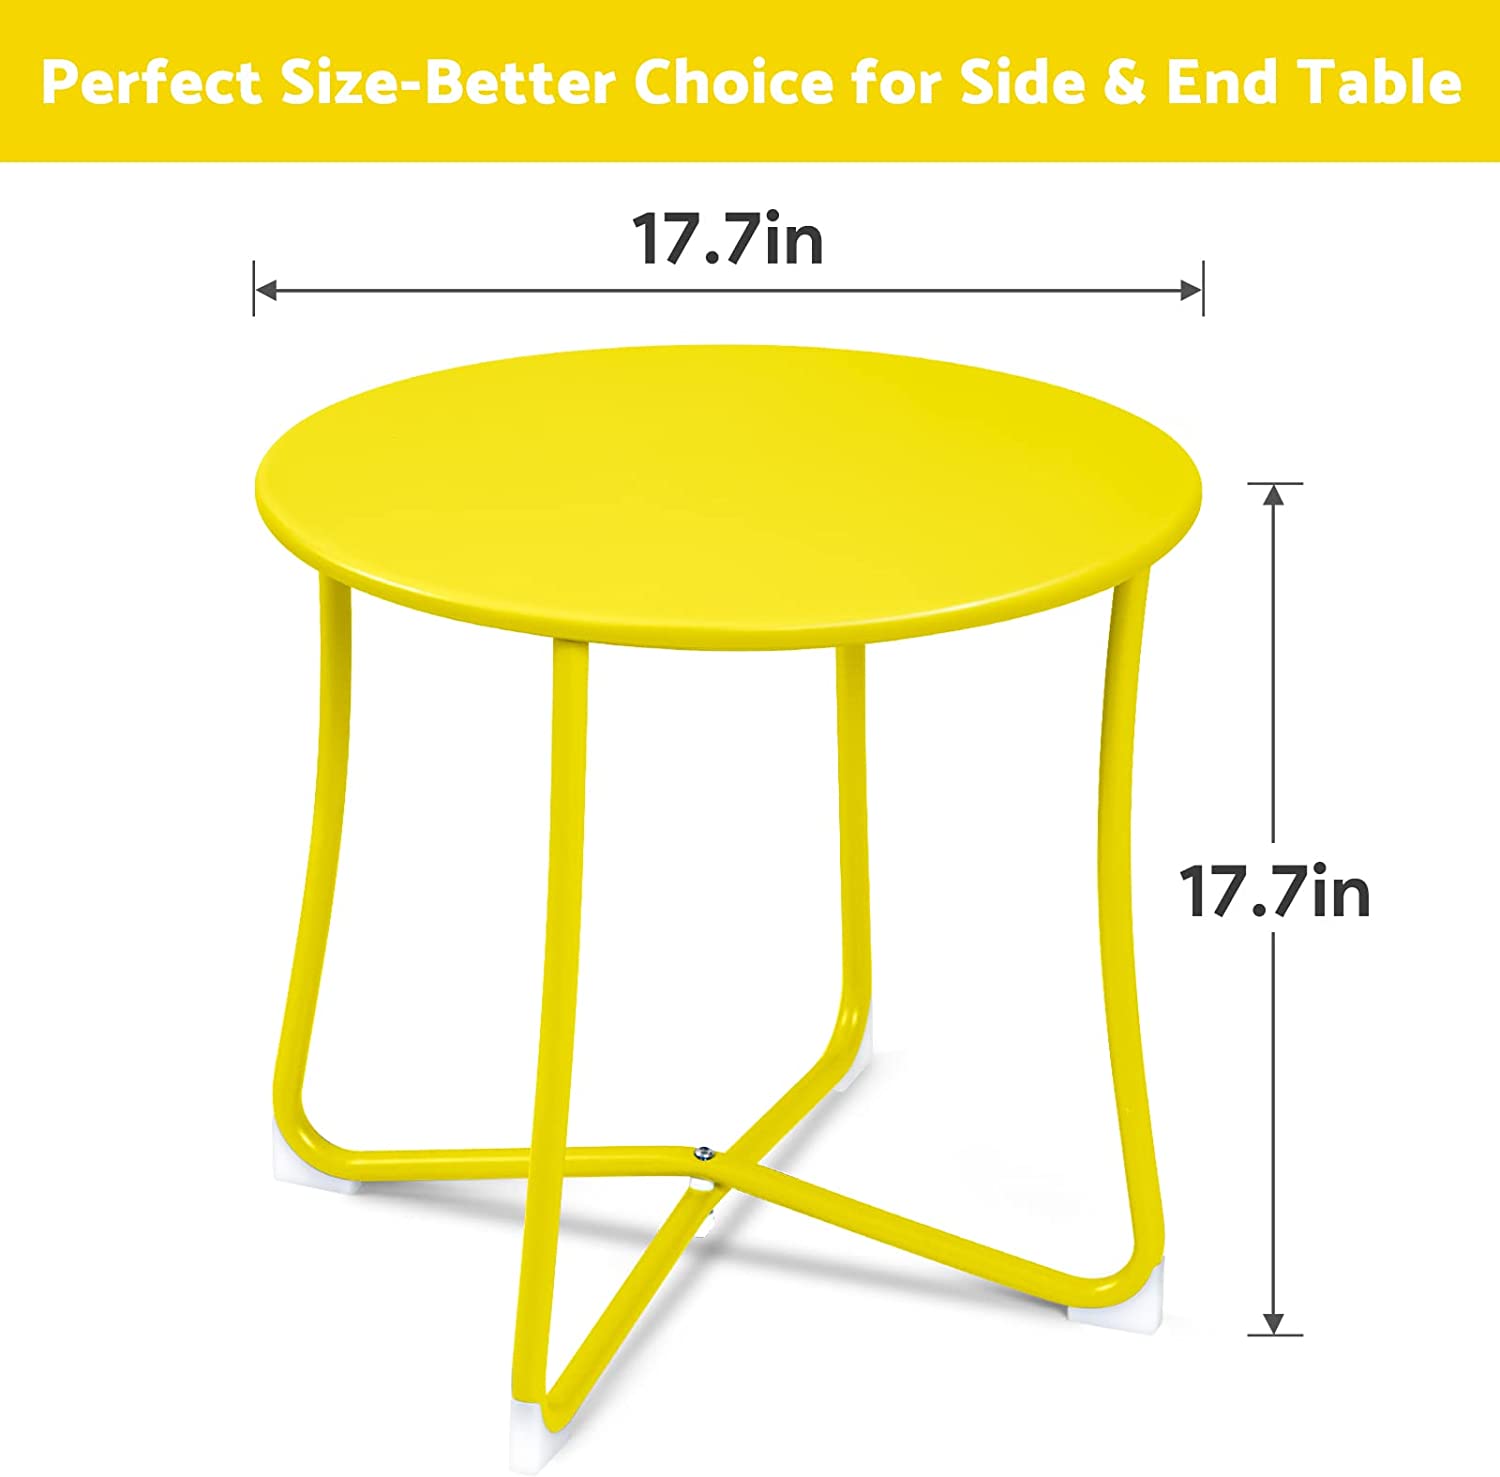 AMAGABELI Metal Patio Side Table 18” x 18” Heavy Duty Weather Resistant Anti-Rust Outdoor End Table Small Steel Round Coffee Table Porch Table Snack Table for Balcony Garden Yard Lawn, Yellow ET091 - image 3 of 8